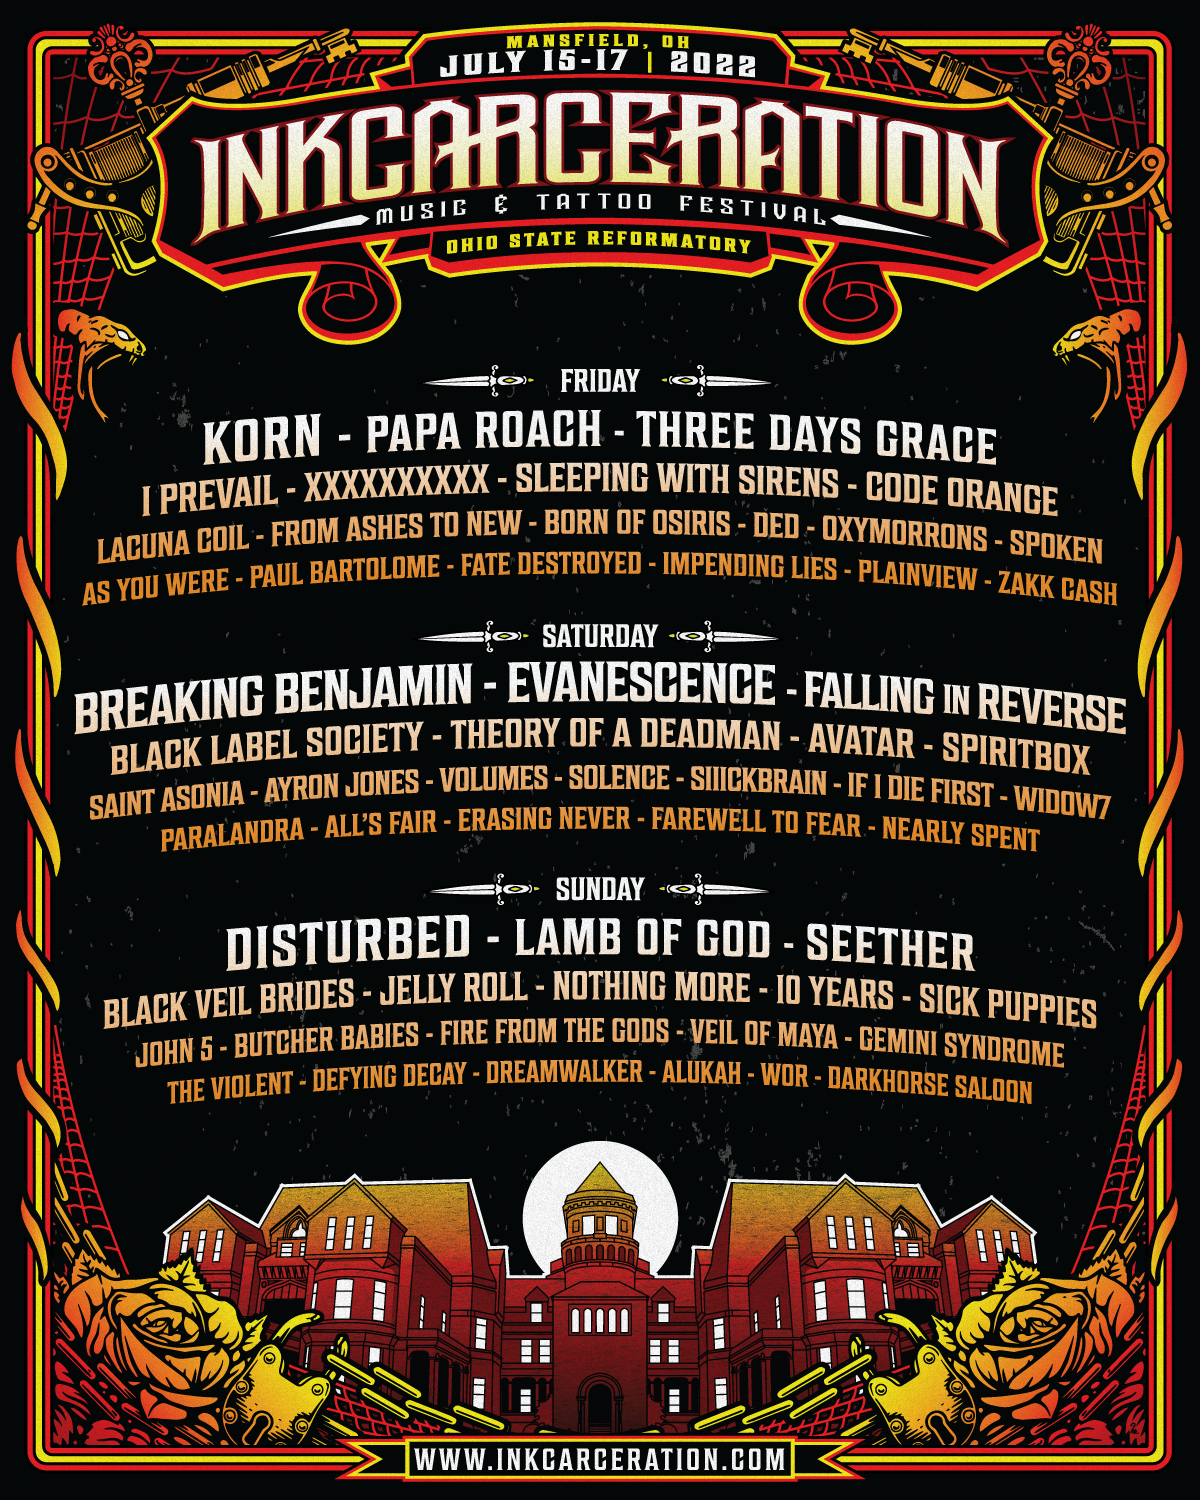 Inkcarceration Festival Poster ft. Disturbed on Sunday